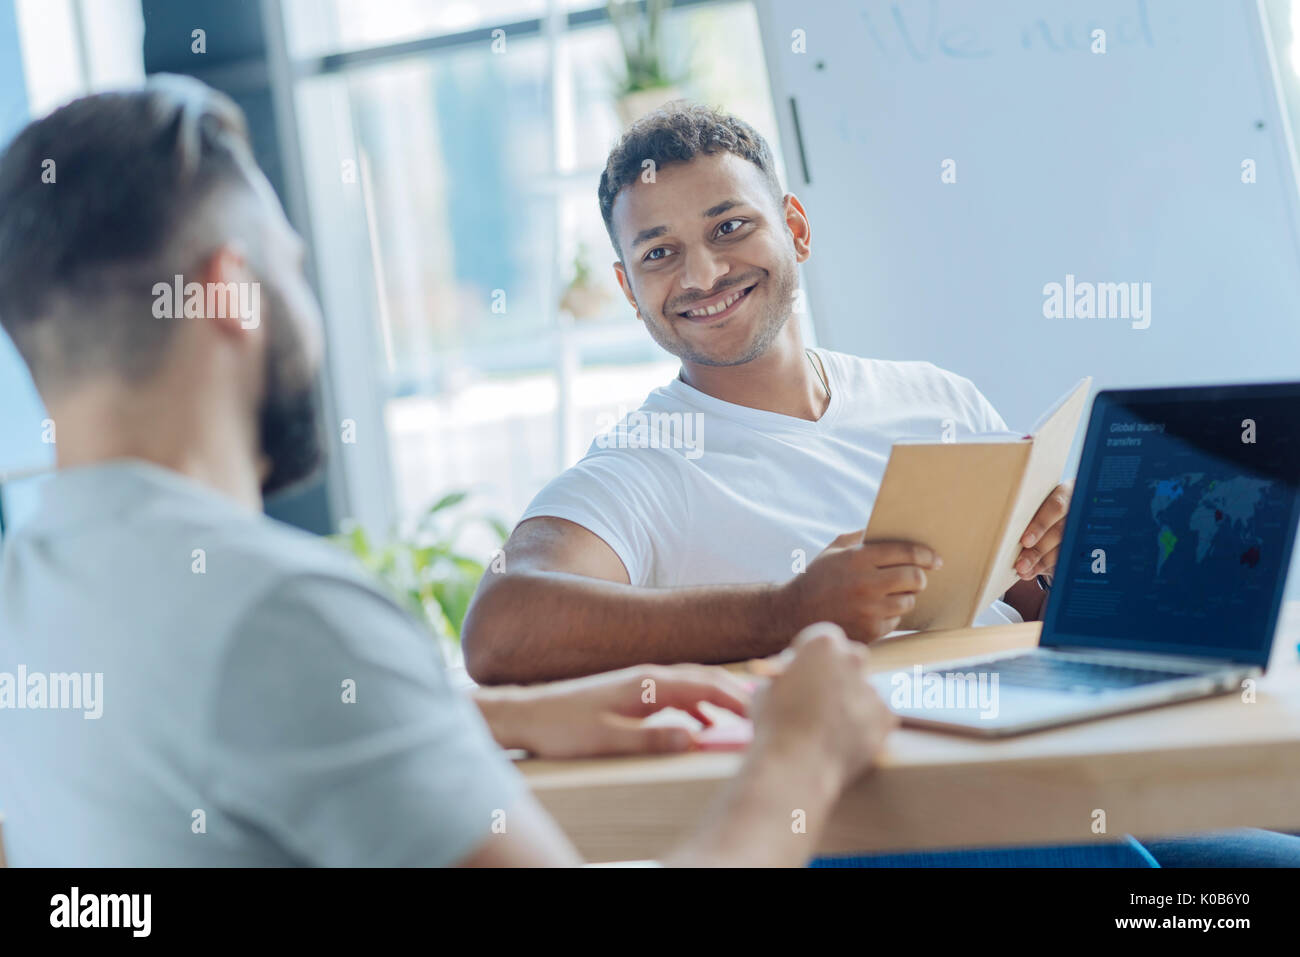 Handsome cheerful man looking at his colleague Stock Photo